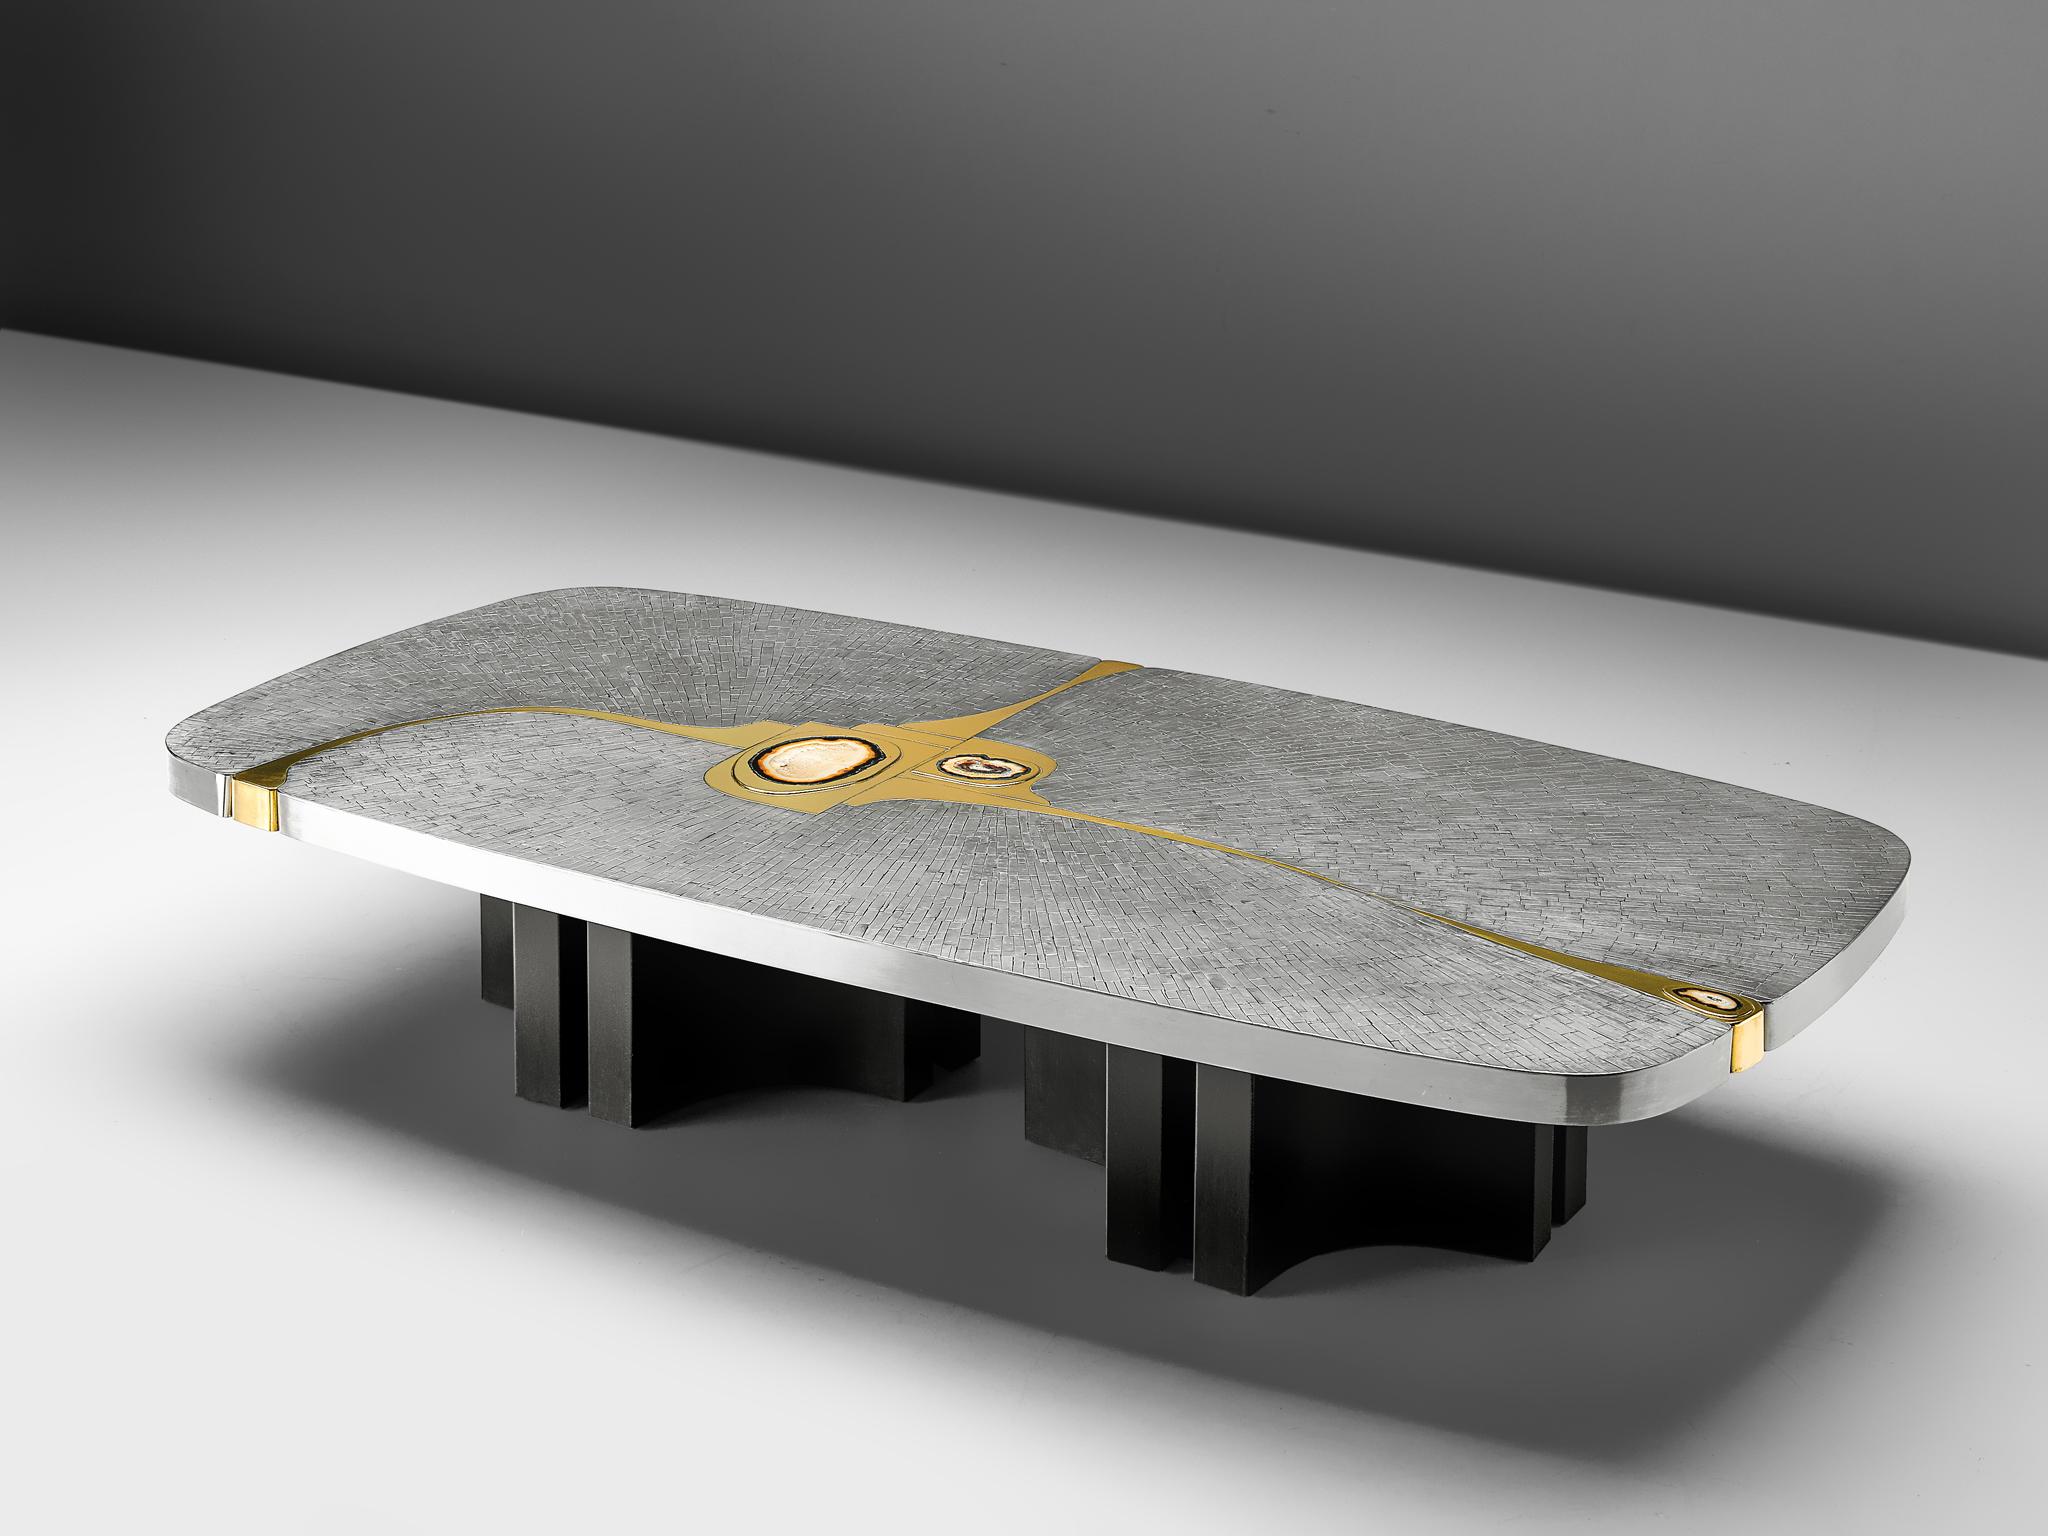 Jean Claude Dresse, coffee table, brushed stainless steel, brass and agate, Belgium, circa 1970

This extraordinary piece was crafted with great eye for proportions and detail, typical for the work of Dresse. The combination of materials, steel,